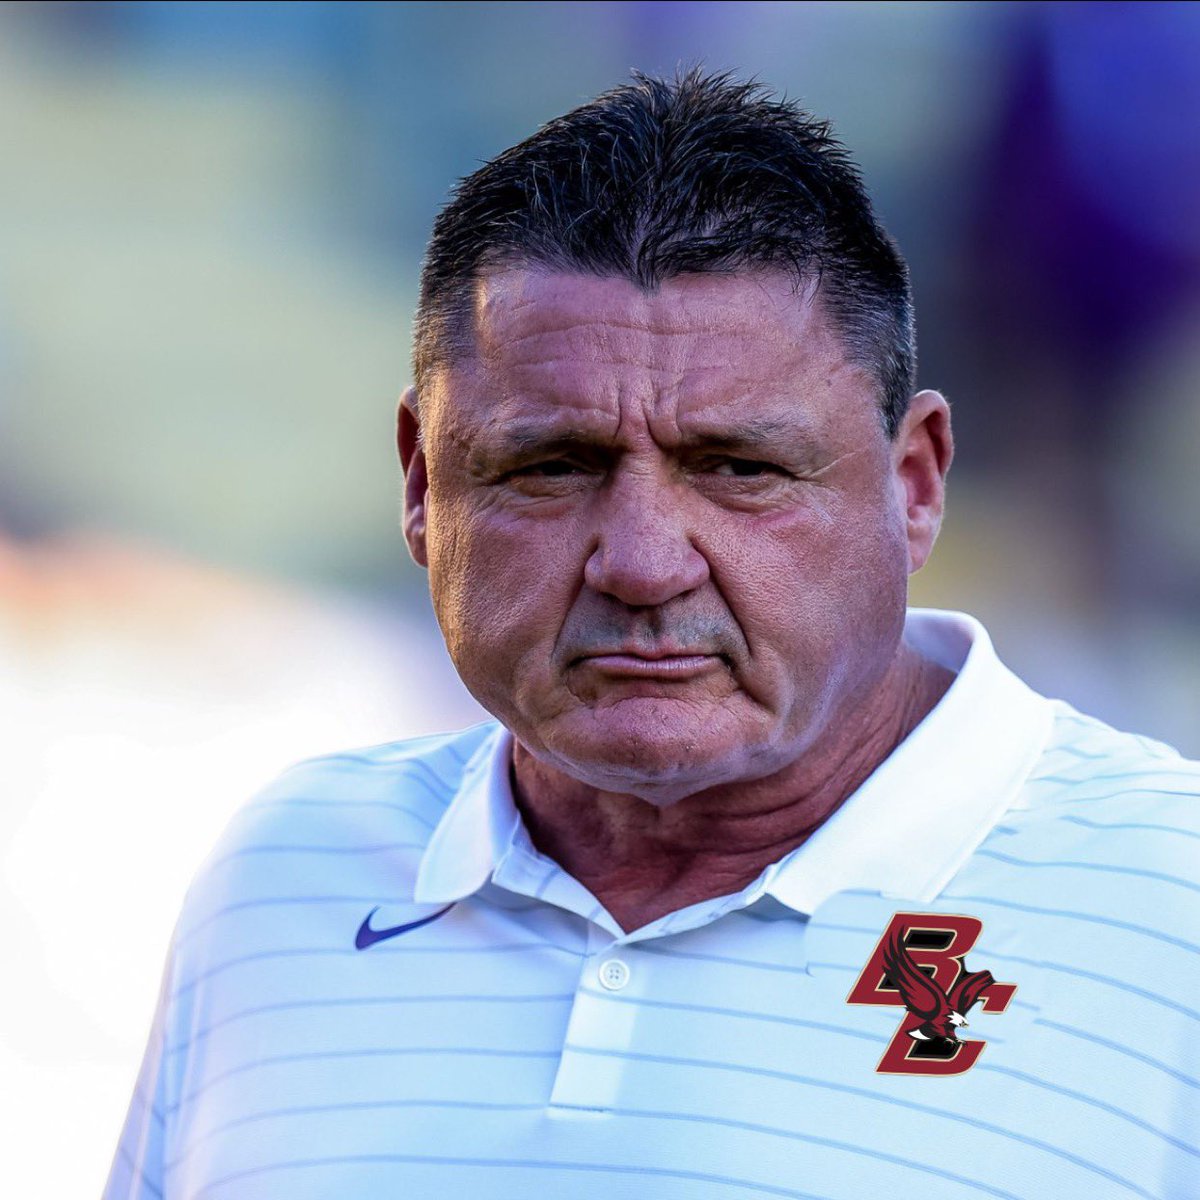 There is a simple solution. It’s always been coach O #GeauxEagles